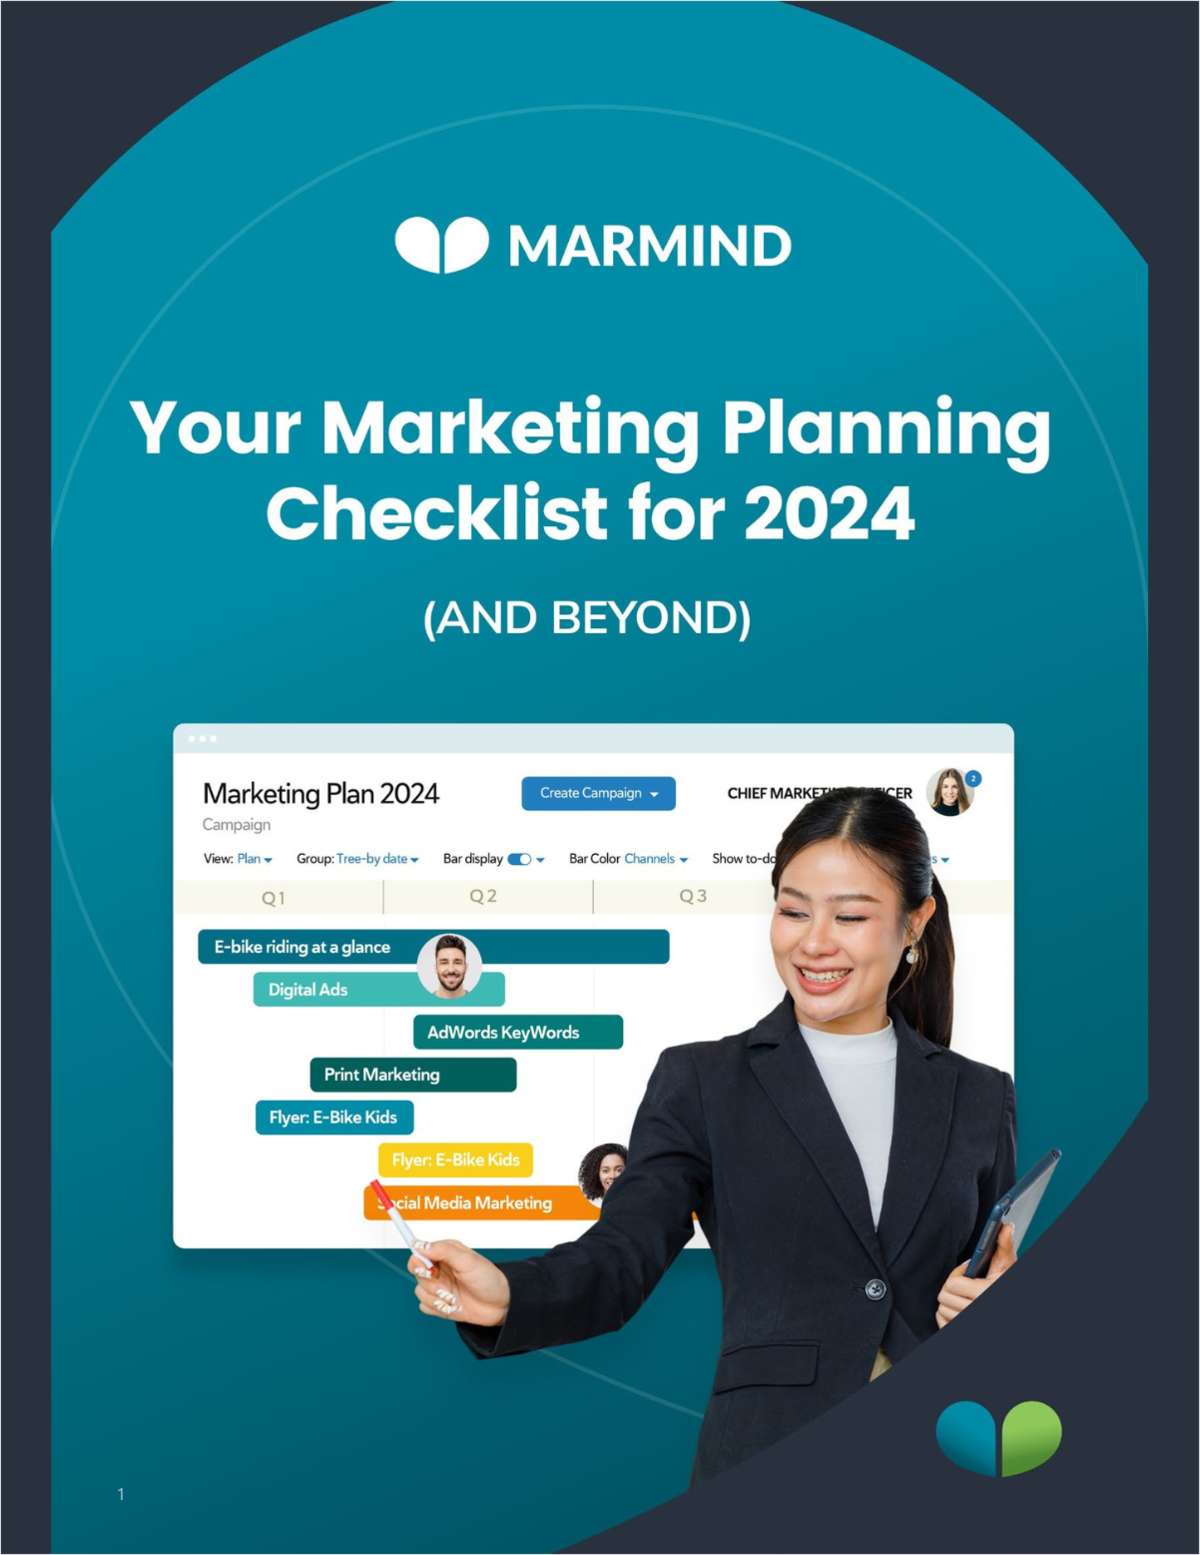 Your Marketing Planning Checklist for 2024 (and beyond)